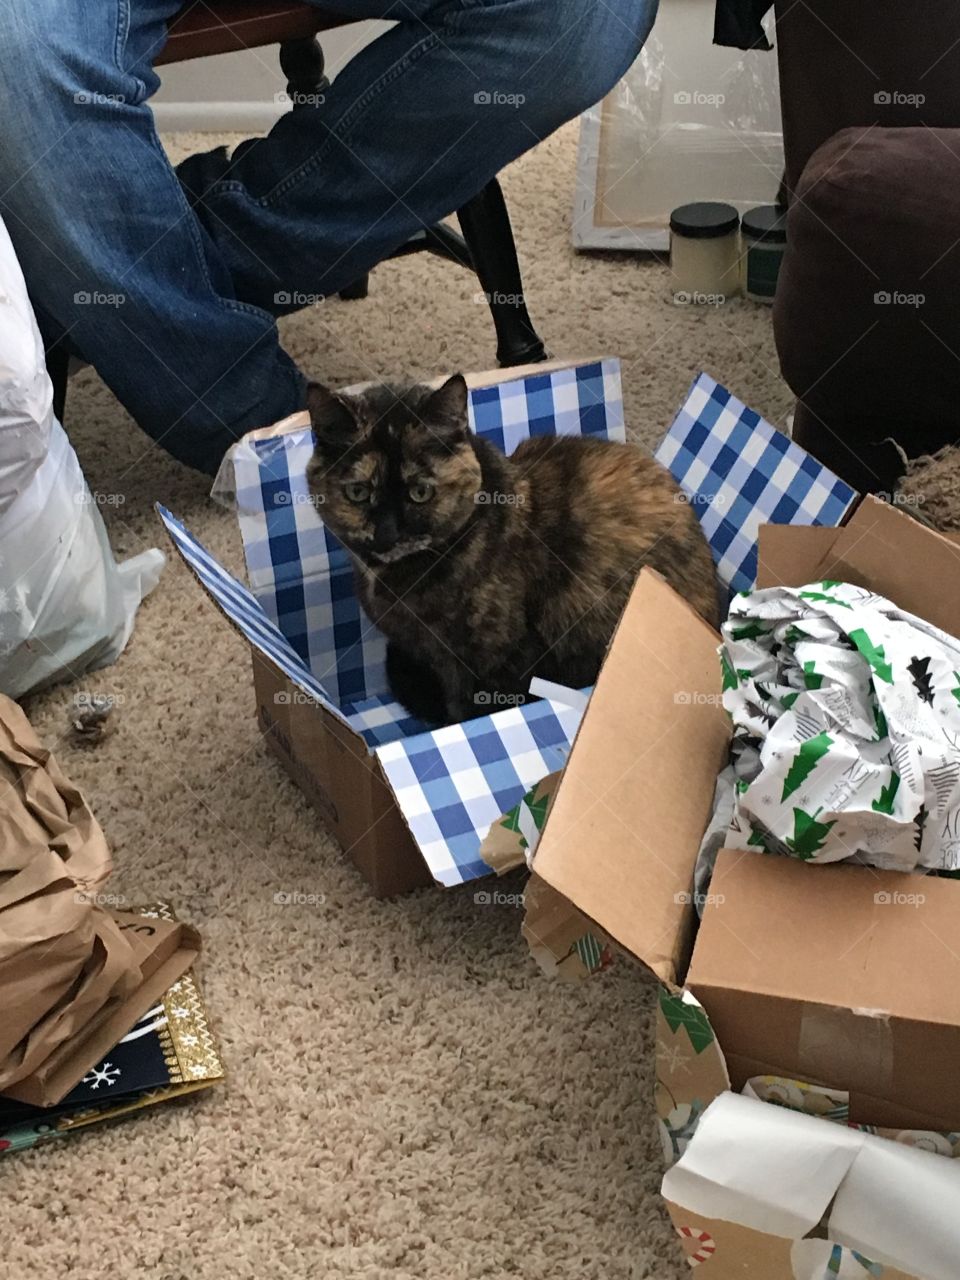 Boxes, The Best Gift